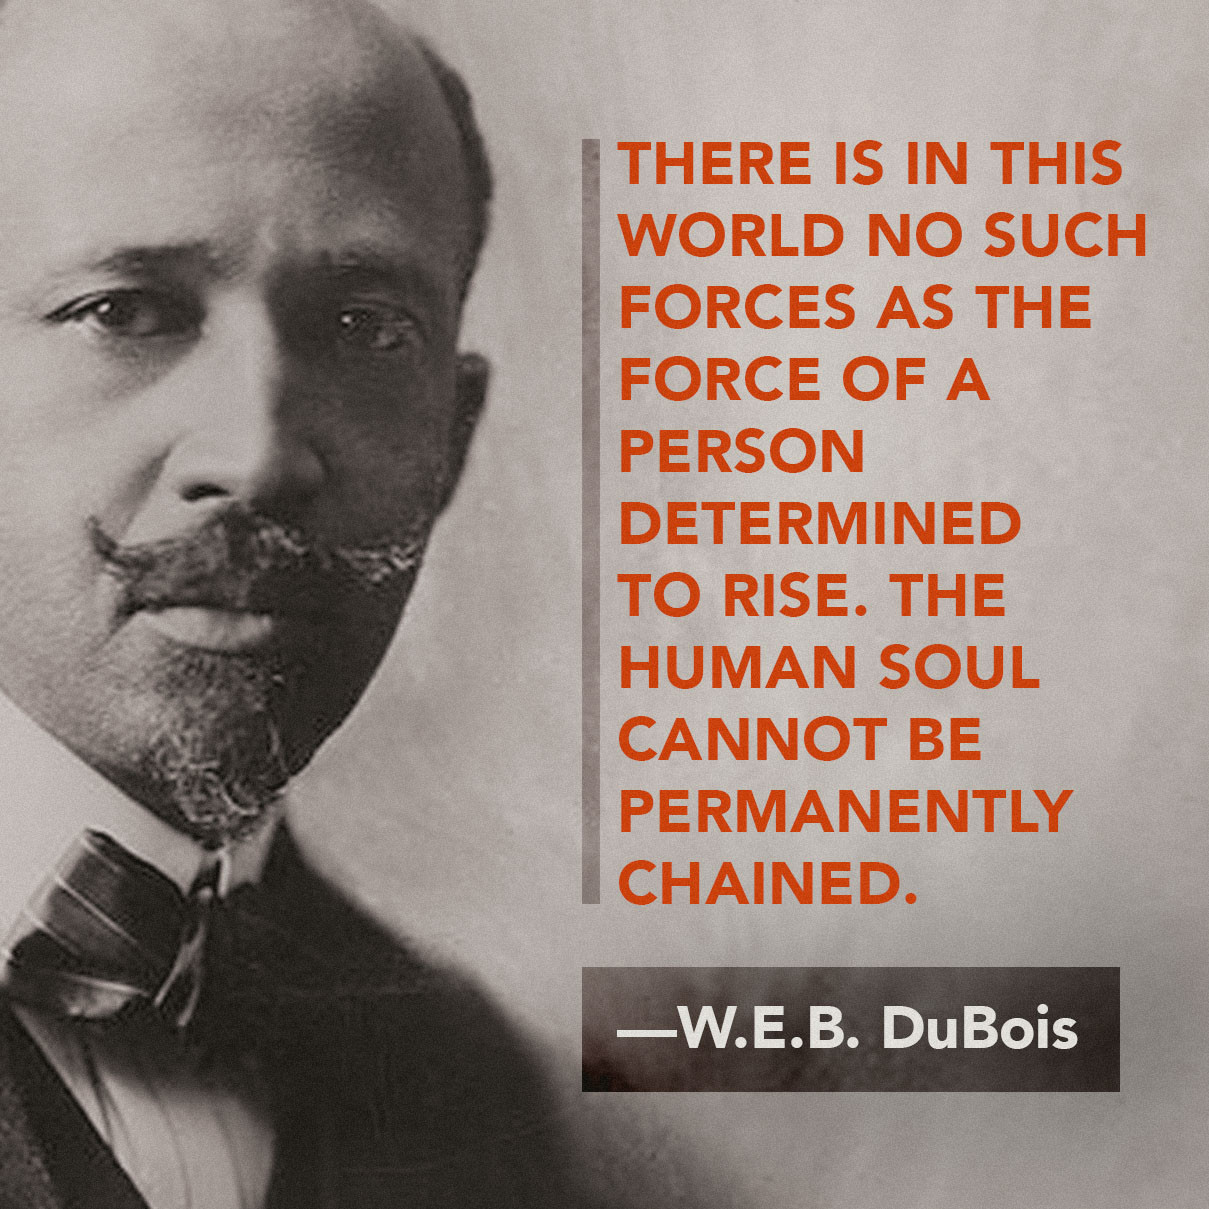 Web Dubois Education Quotes
 BLACK HISTORY QUOTES ON EDUCATION image quotes at